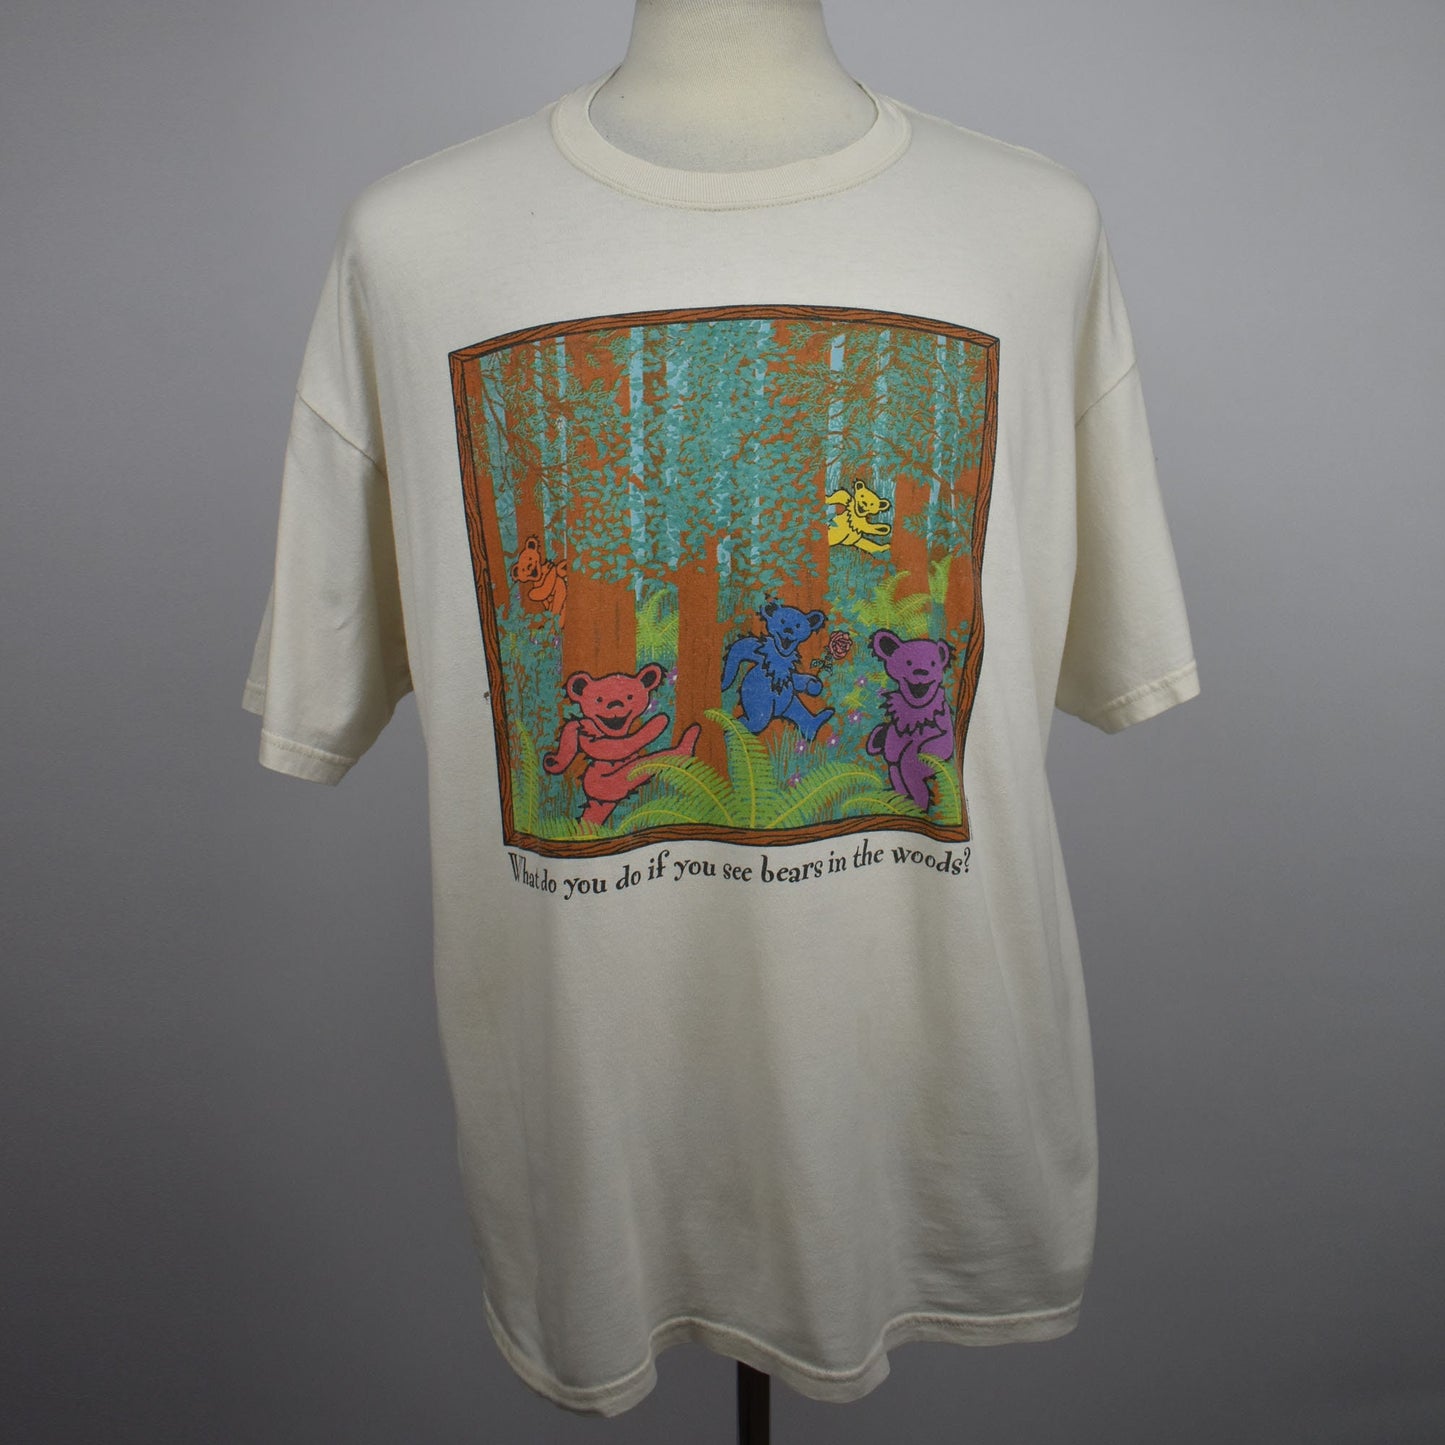 Vintage 1998 The Grateful Dead Bears In The Woods Play Dead T-shirt